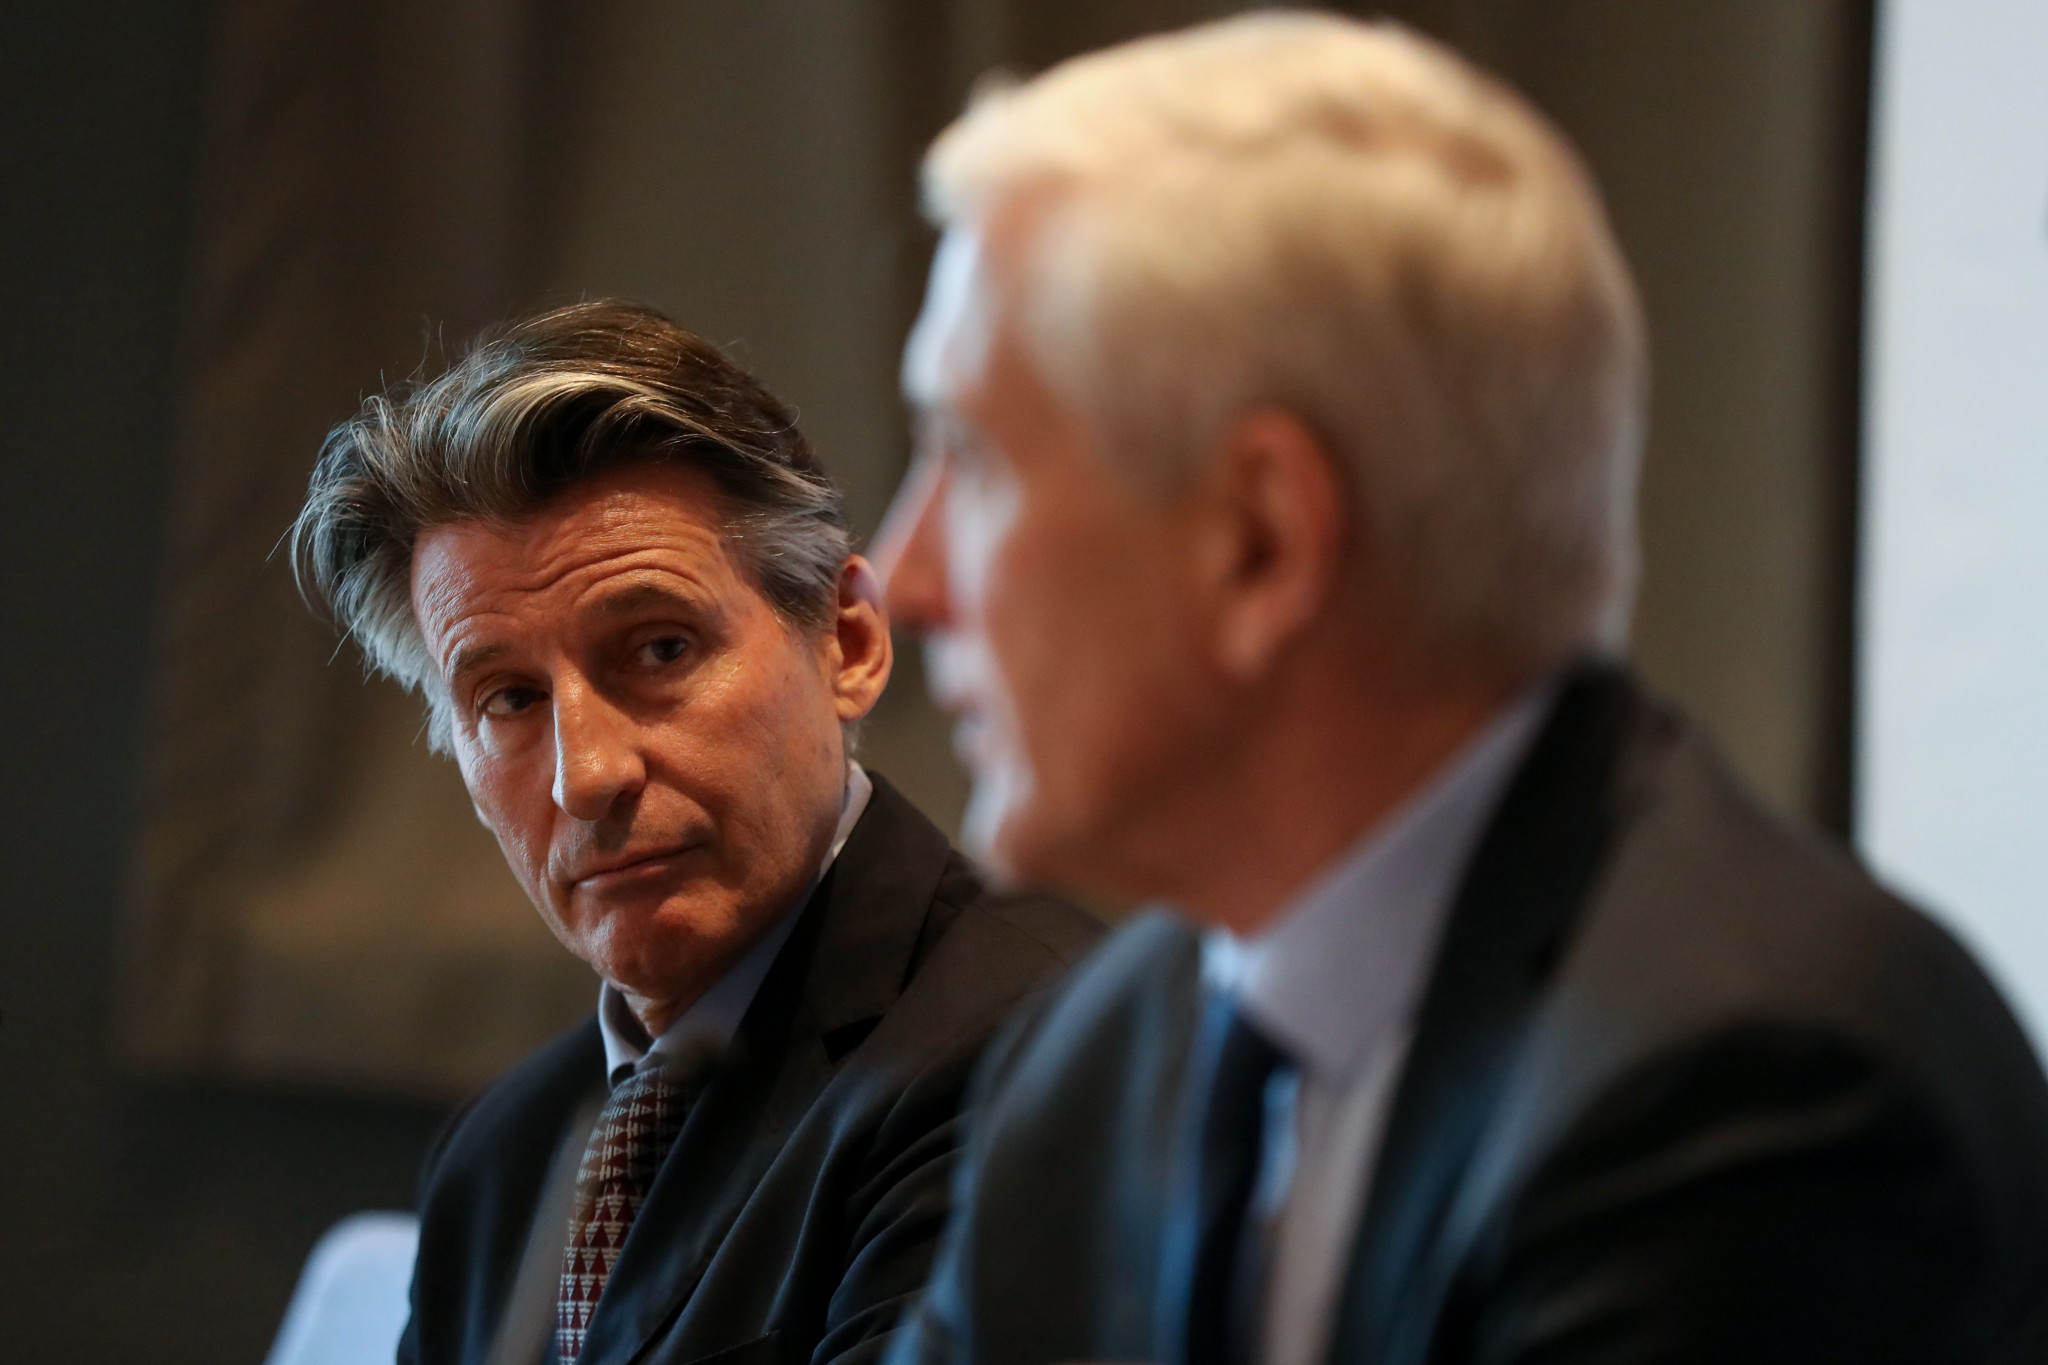 Sebastian Coe has guided the IAAF's strong position on Russia in the face of other organisations, like the IOC and WADA, backing down and has seen his reputation rise ©Getty Images